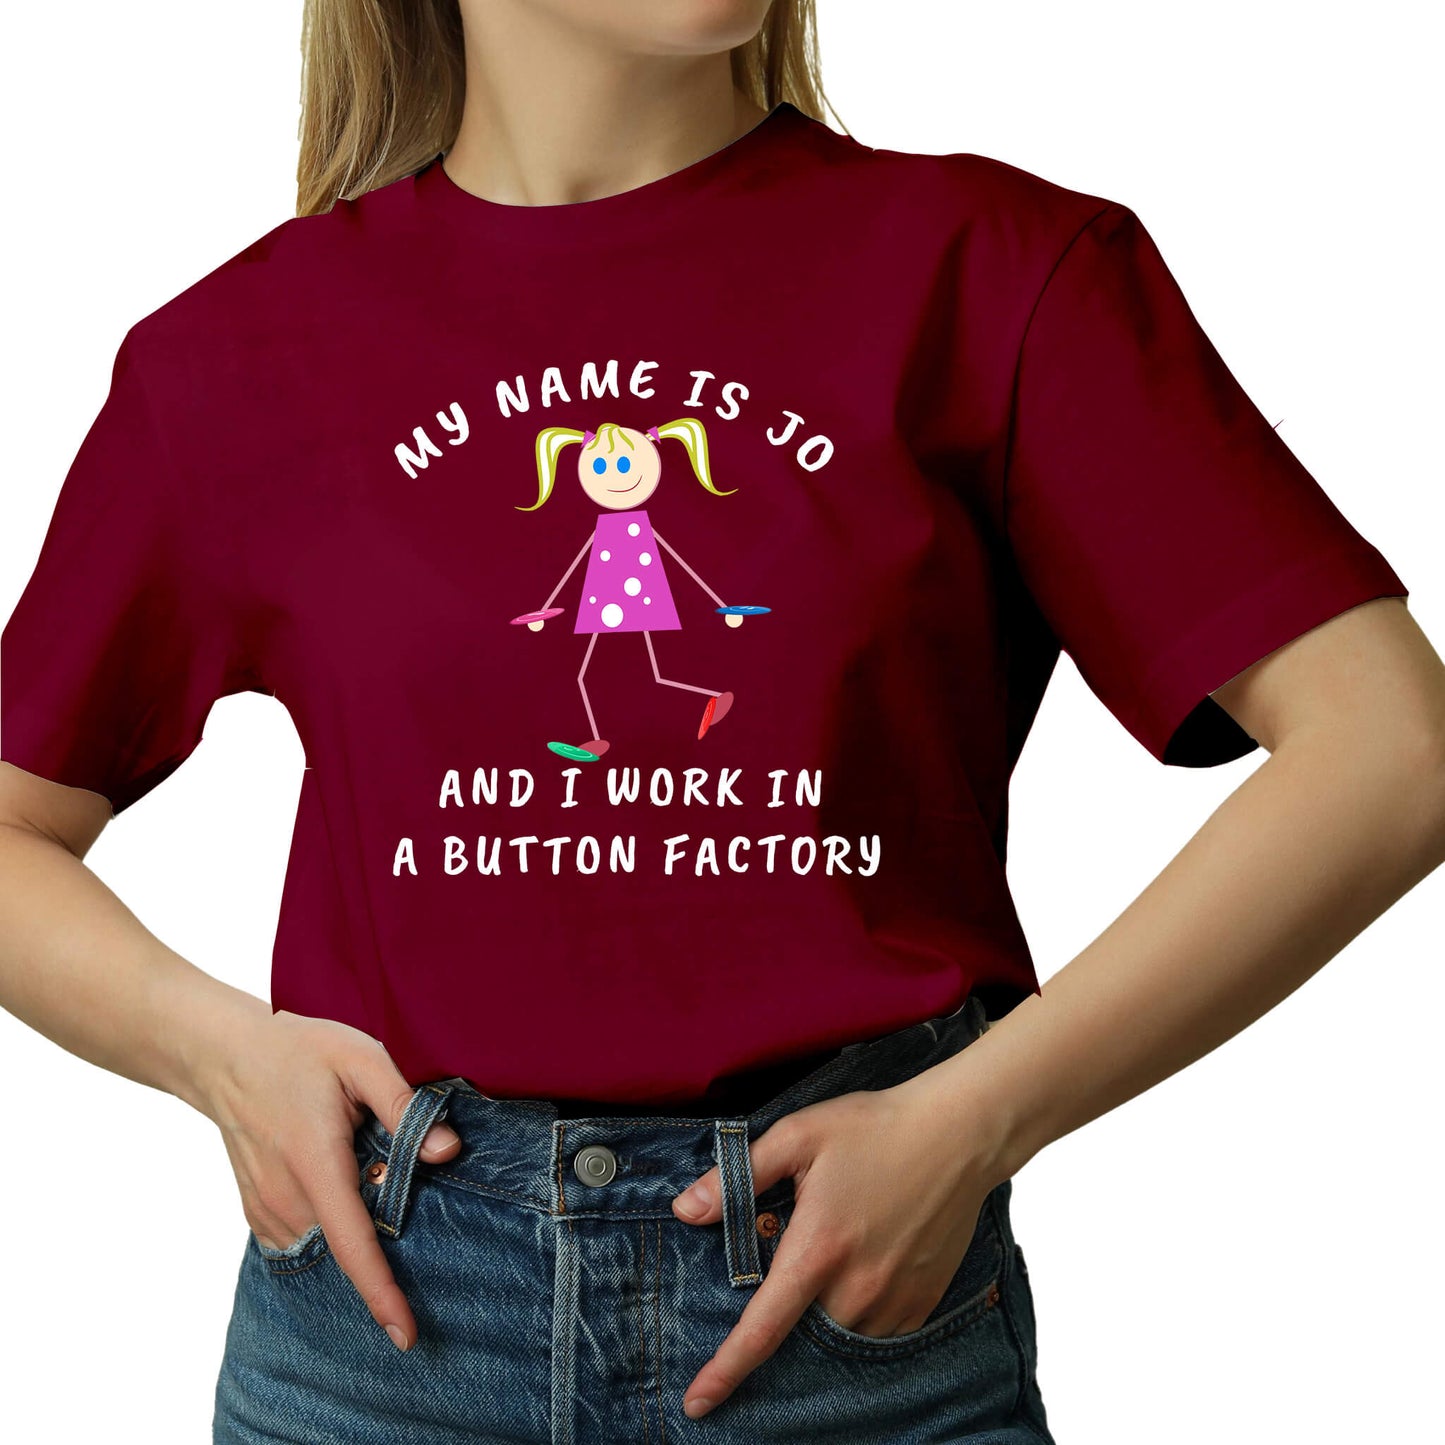 MY NAME IS JO AND I WORK IN A BUTTON FACTORY T-SHIRT red